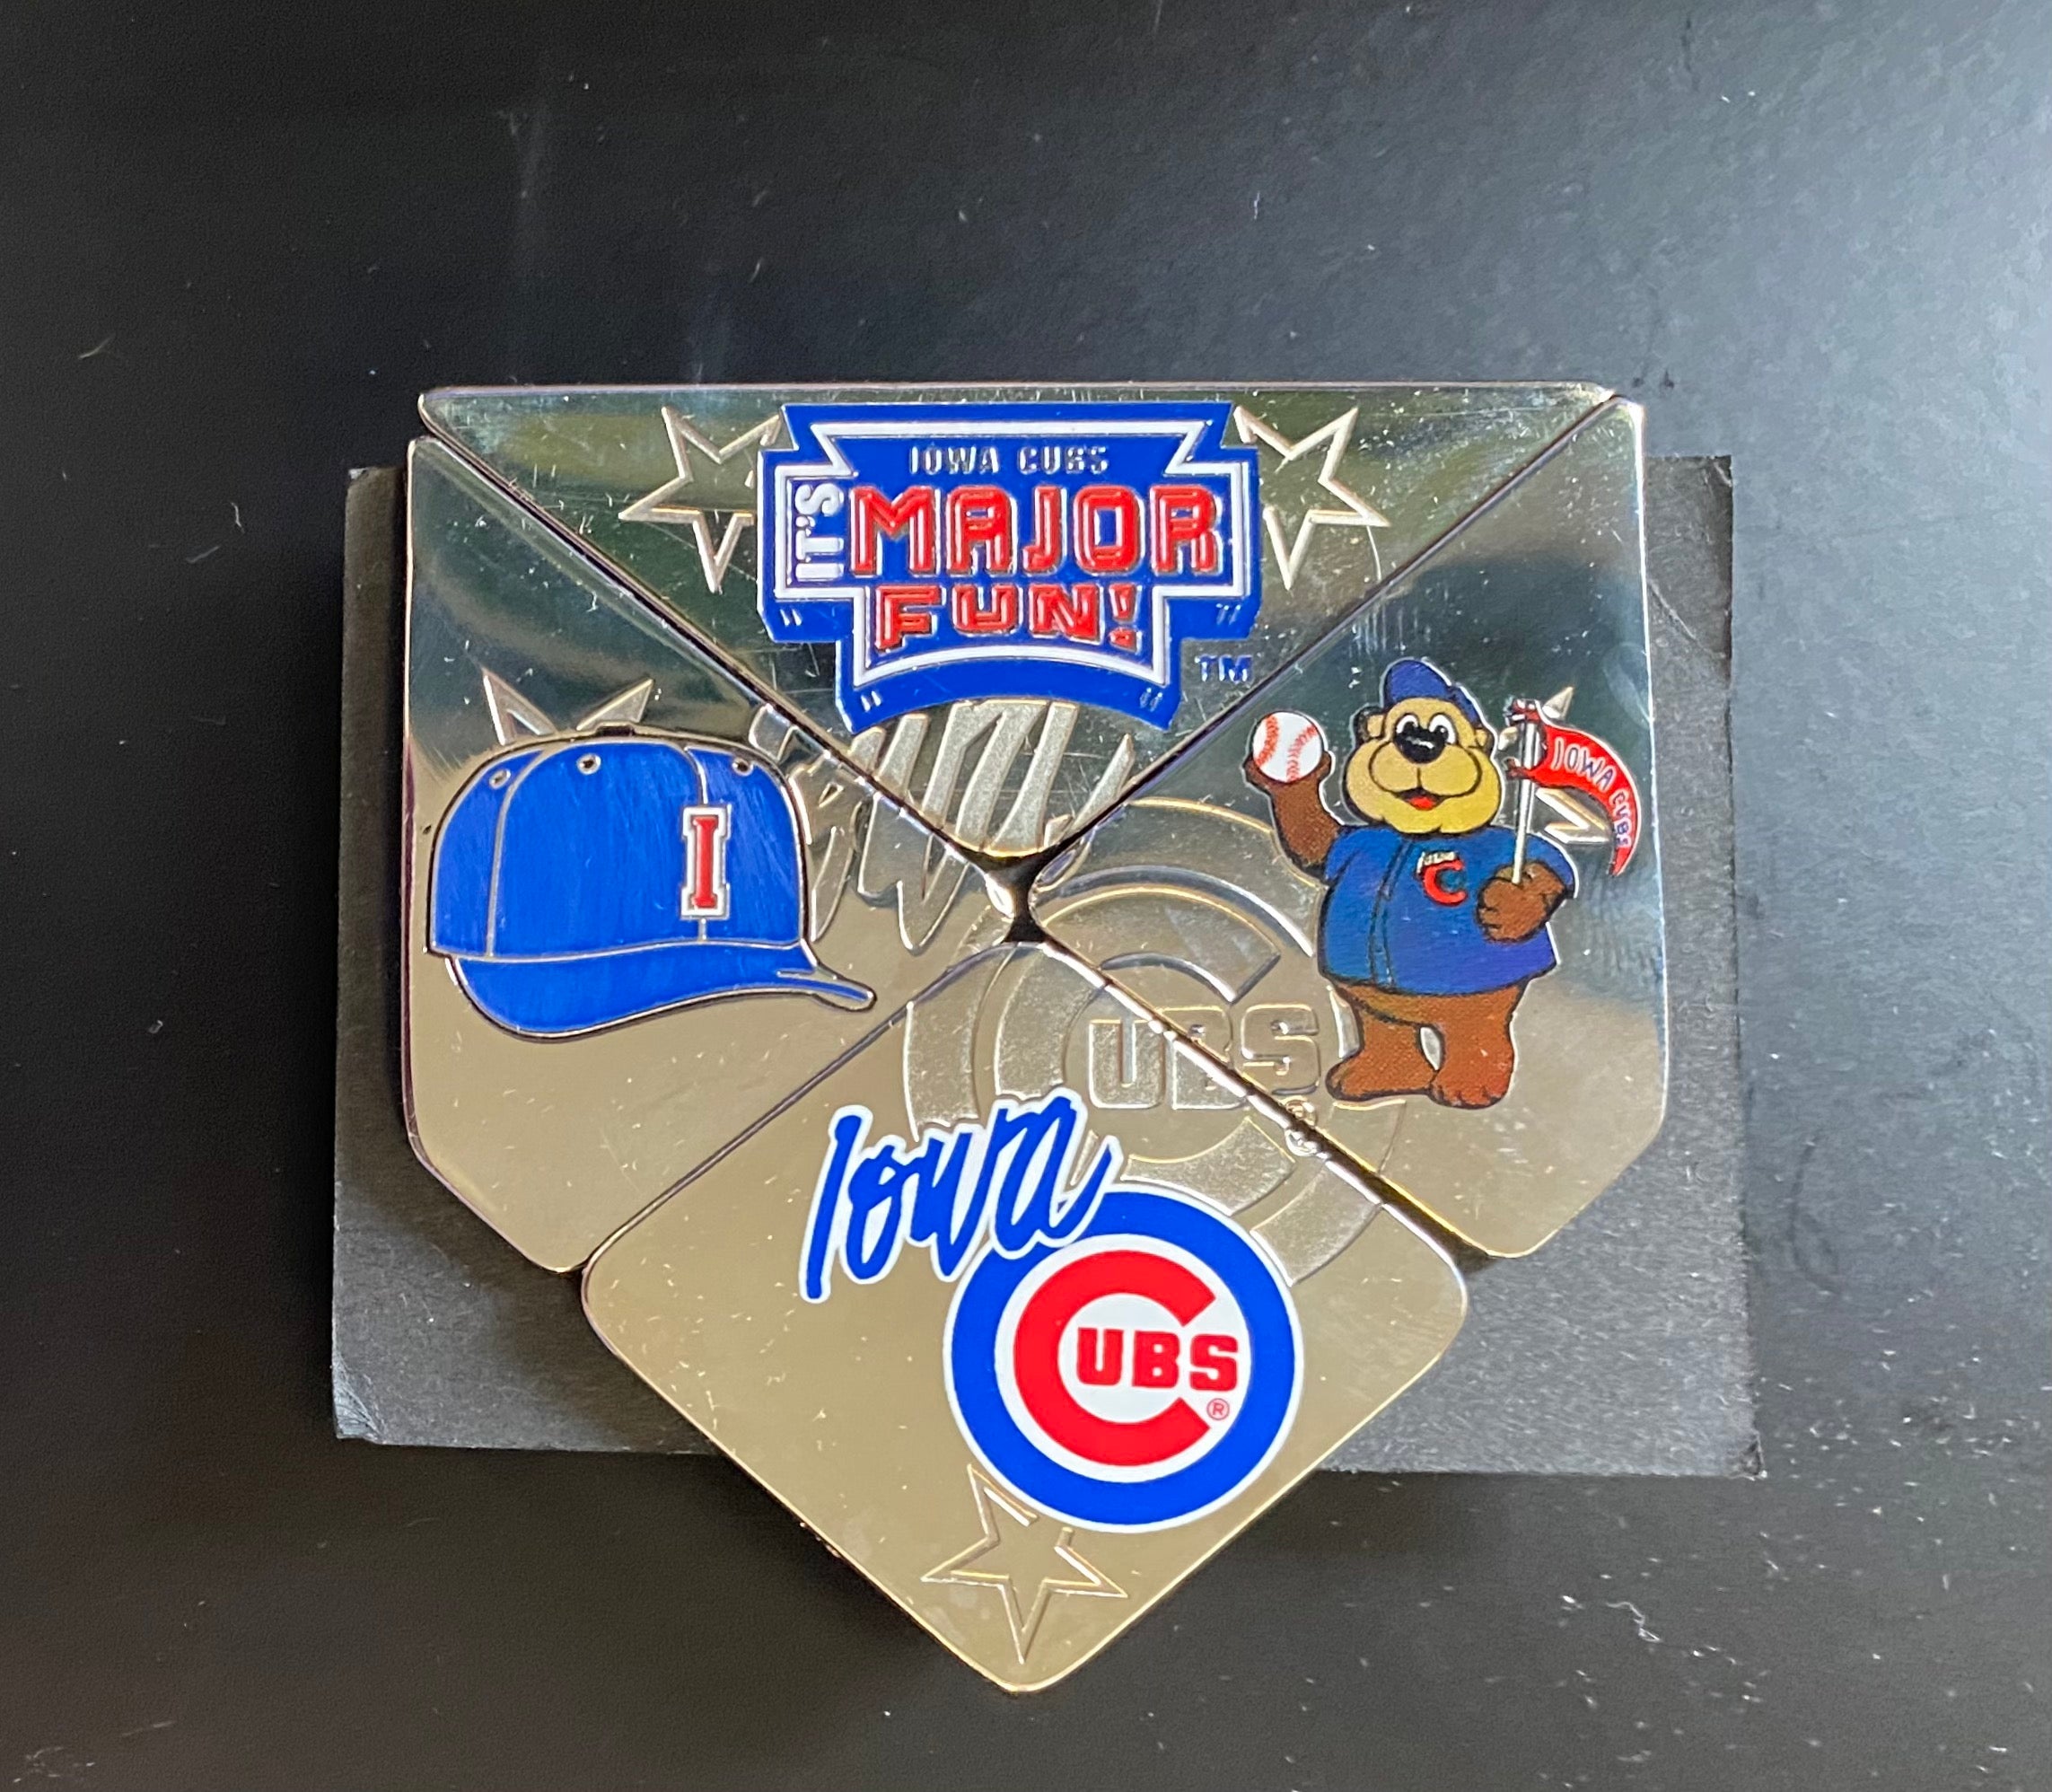 Pin on Cubs